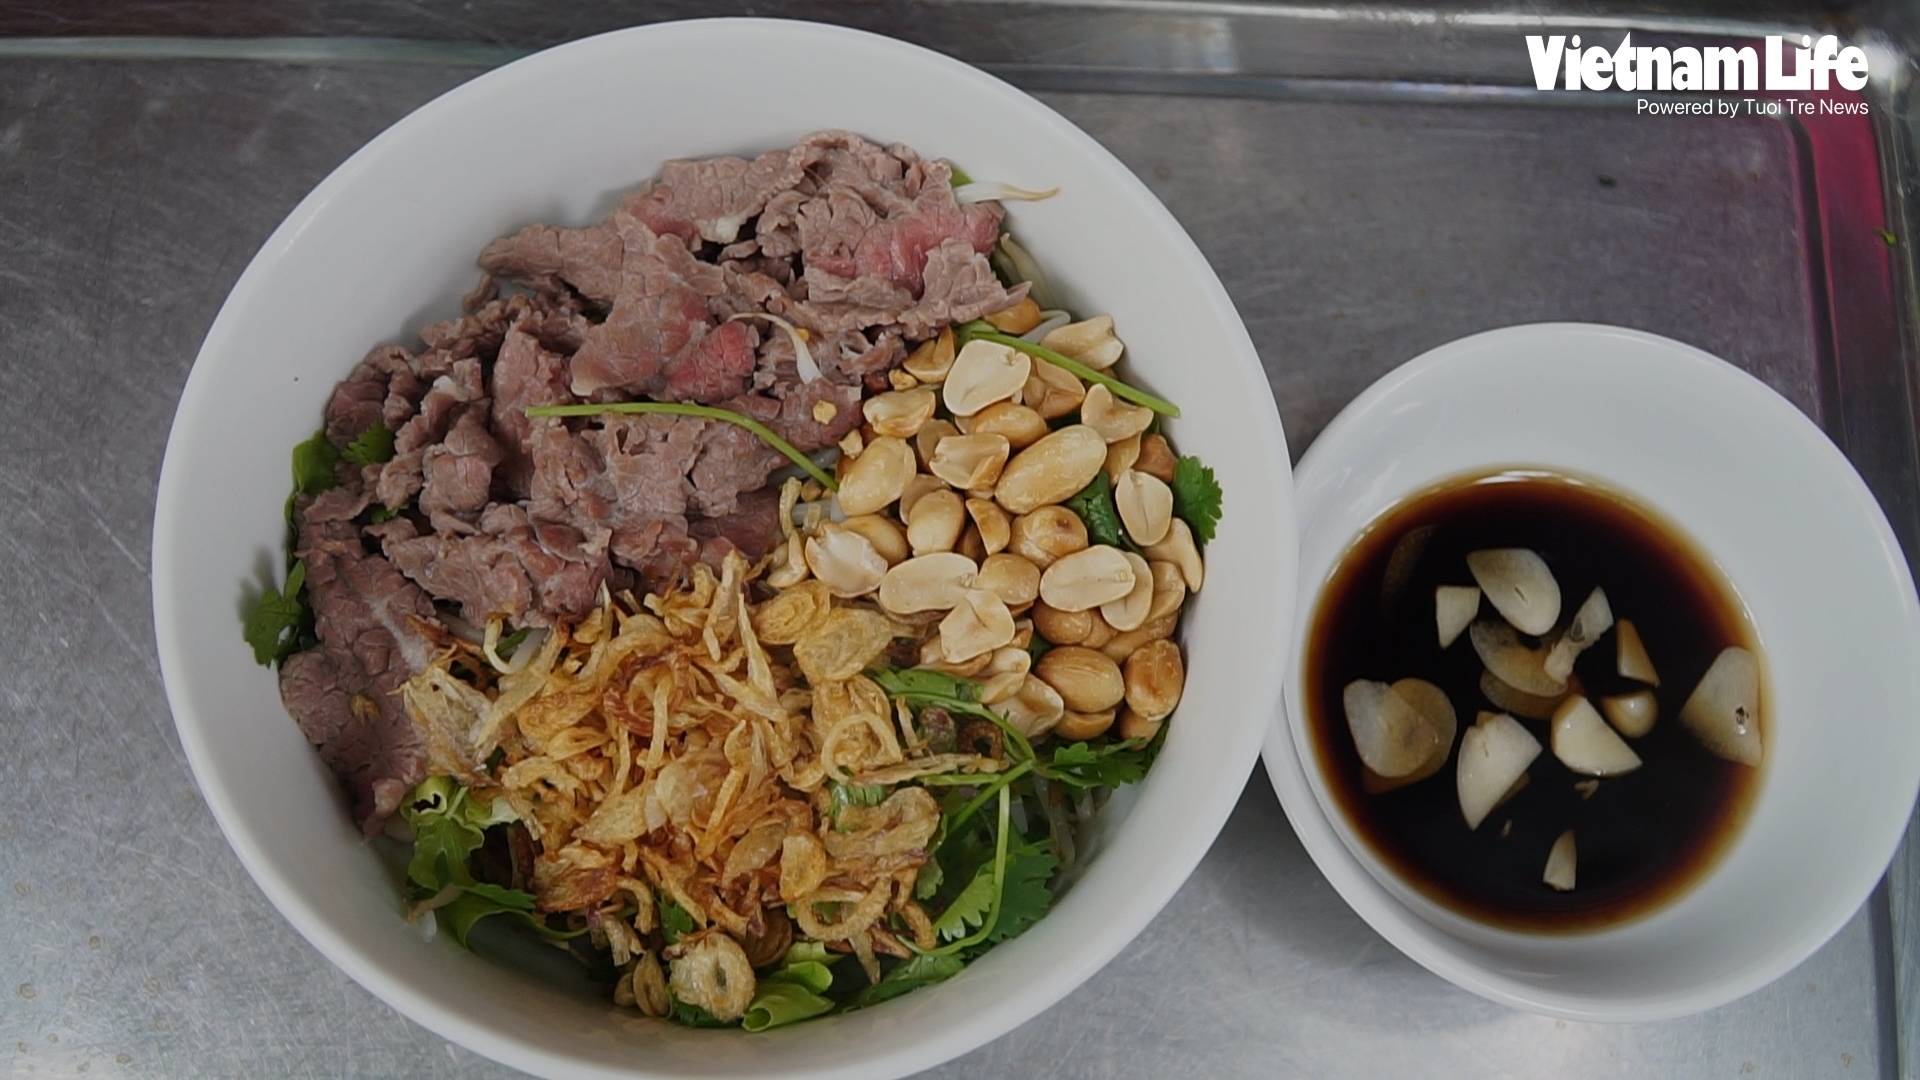 Mix and roll: Two soupless versions of Vietnam’s famous ‘pho’